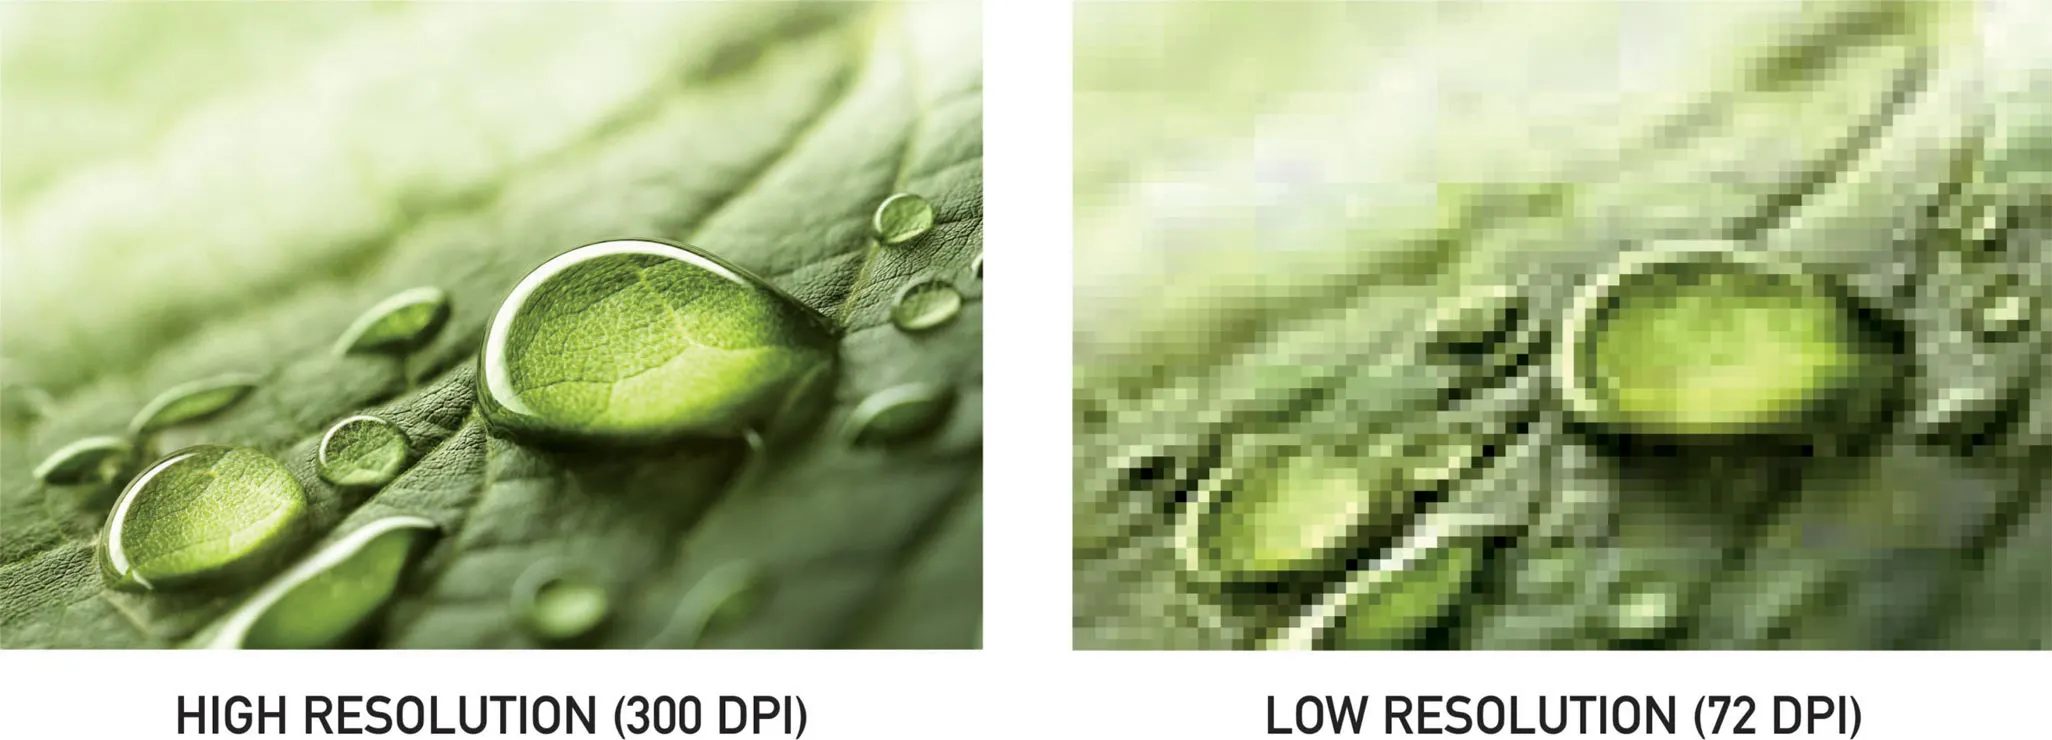 A high resolution 300 DPI  image compared to a  low resolution 72 DPI image